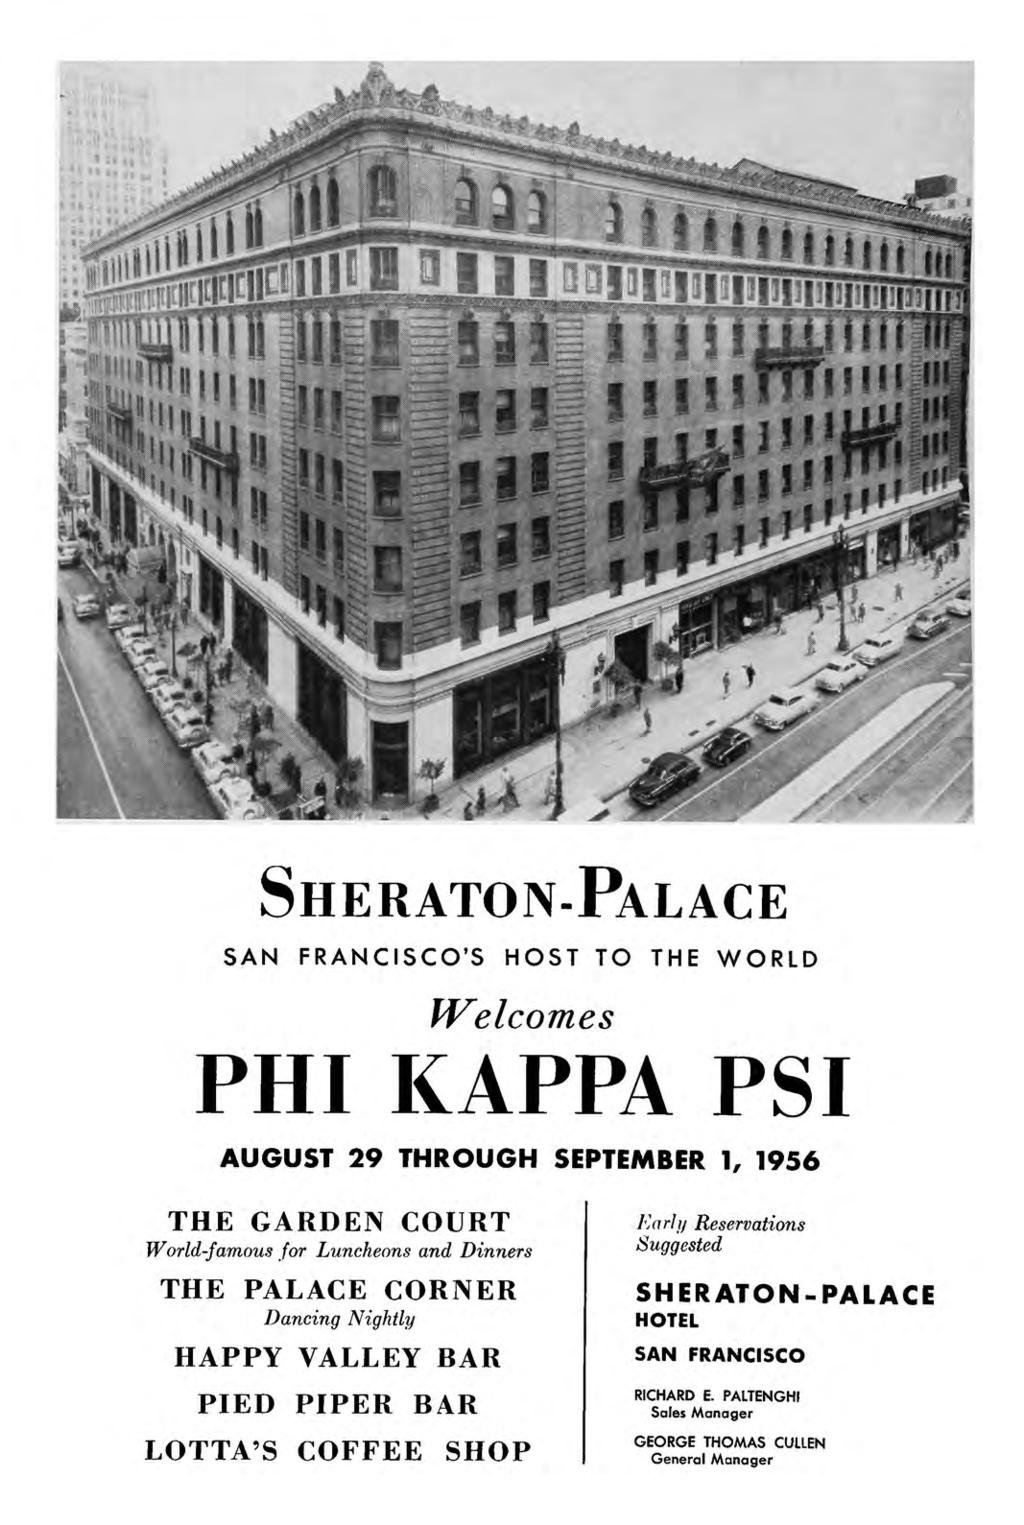 SHERATON-PALACE SAN FRANCISCO'S HOST TO THE WORLD IVelcomes PHI KAPPA PSI AUGUST 29 THROUGH SEPTEMBER 1, 1956 THE GARDEN COURT World-famous for Luncheons and Dinners THE PALACE CORNER Dancing